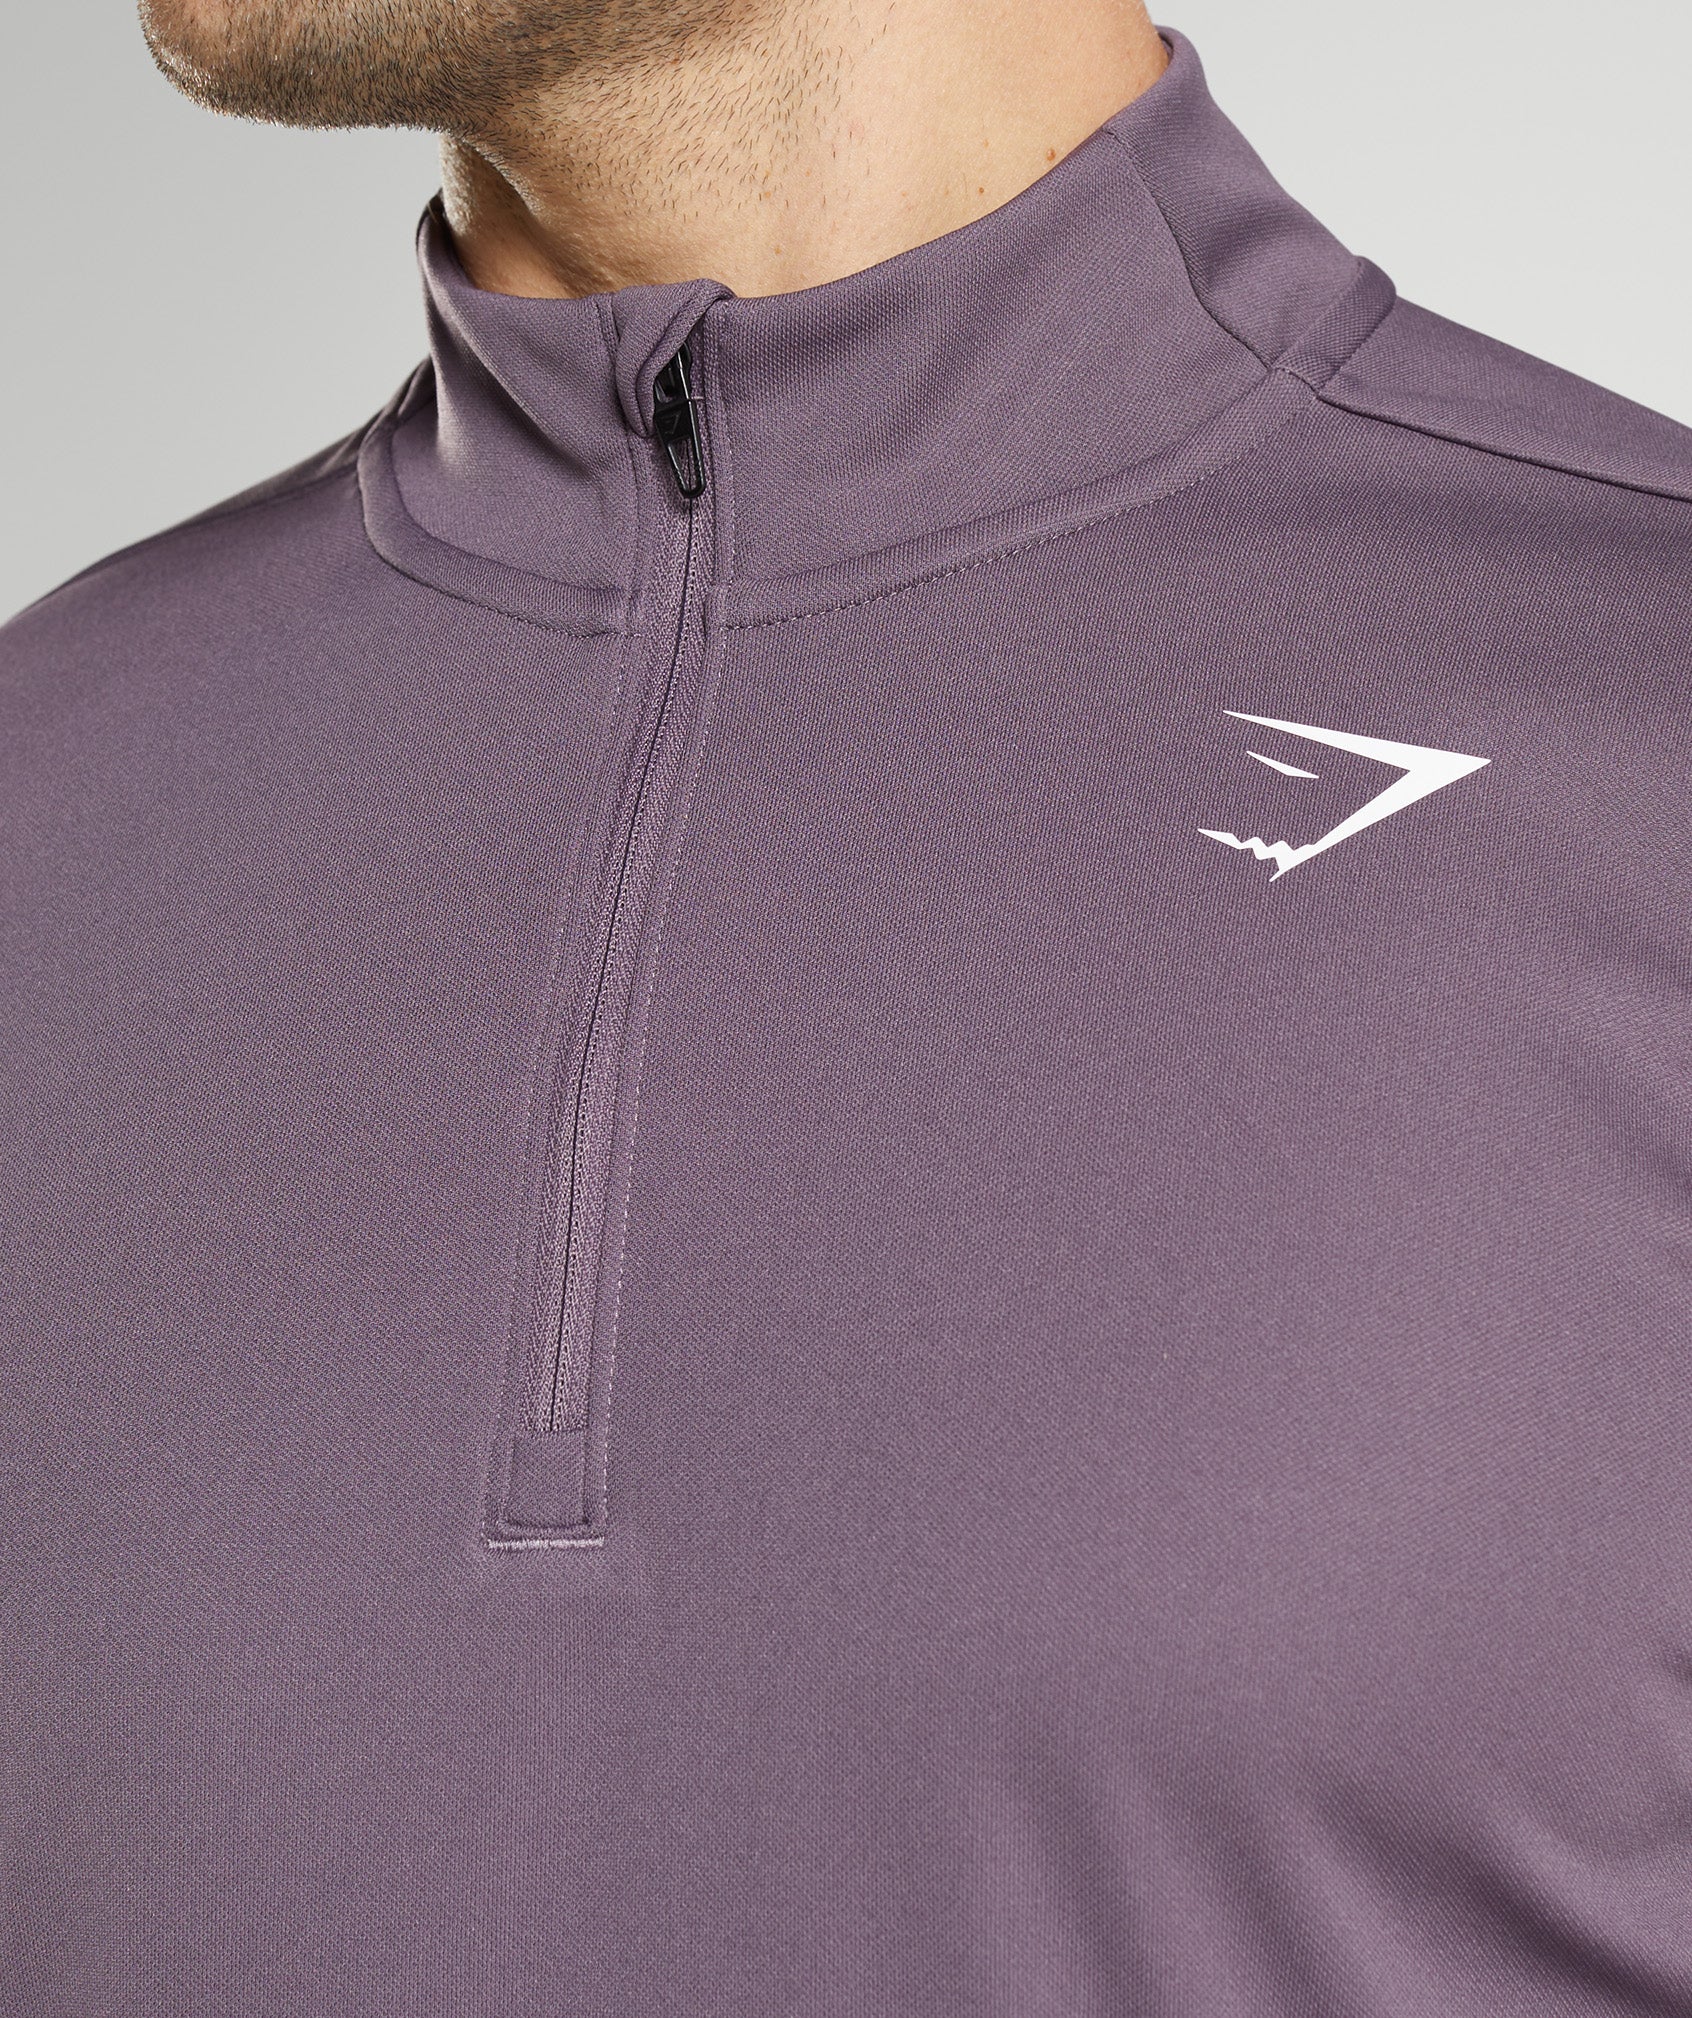 Arrival 1/4 Zip Pullover in Musk Lilac - view 3